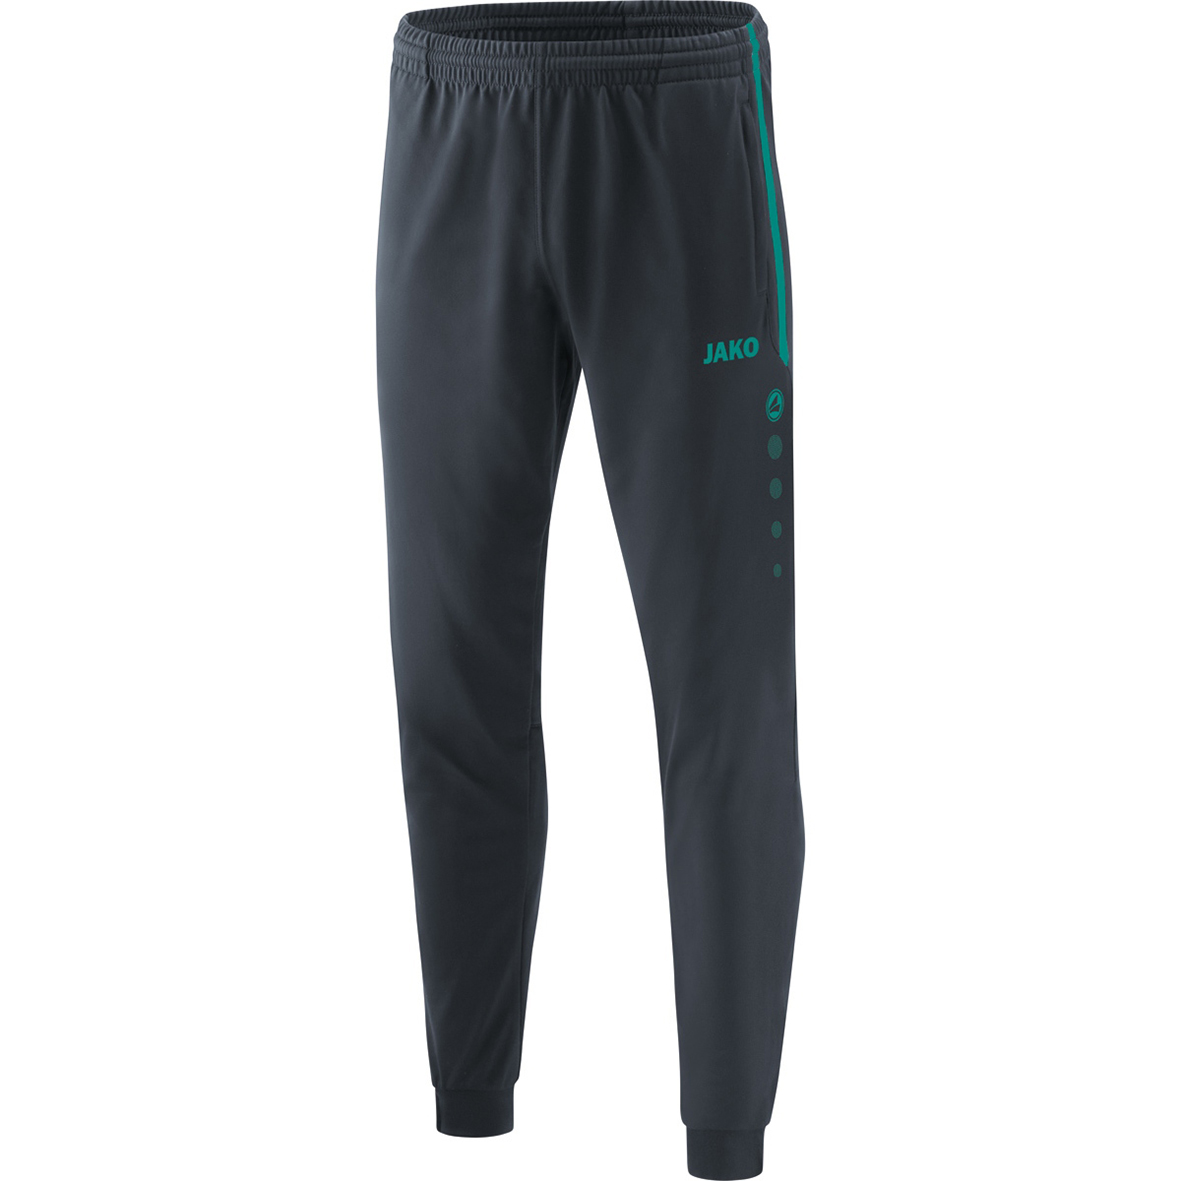 TROUSERS JAKO COMPETITION 2.0, ANTHRACITE-TURQUOISE KIDS.